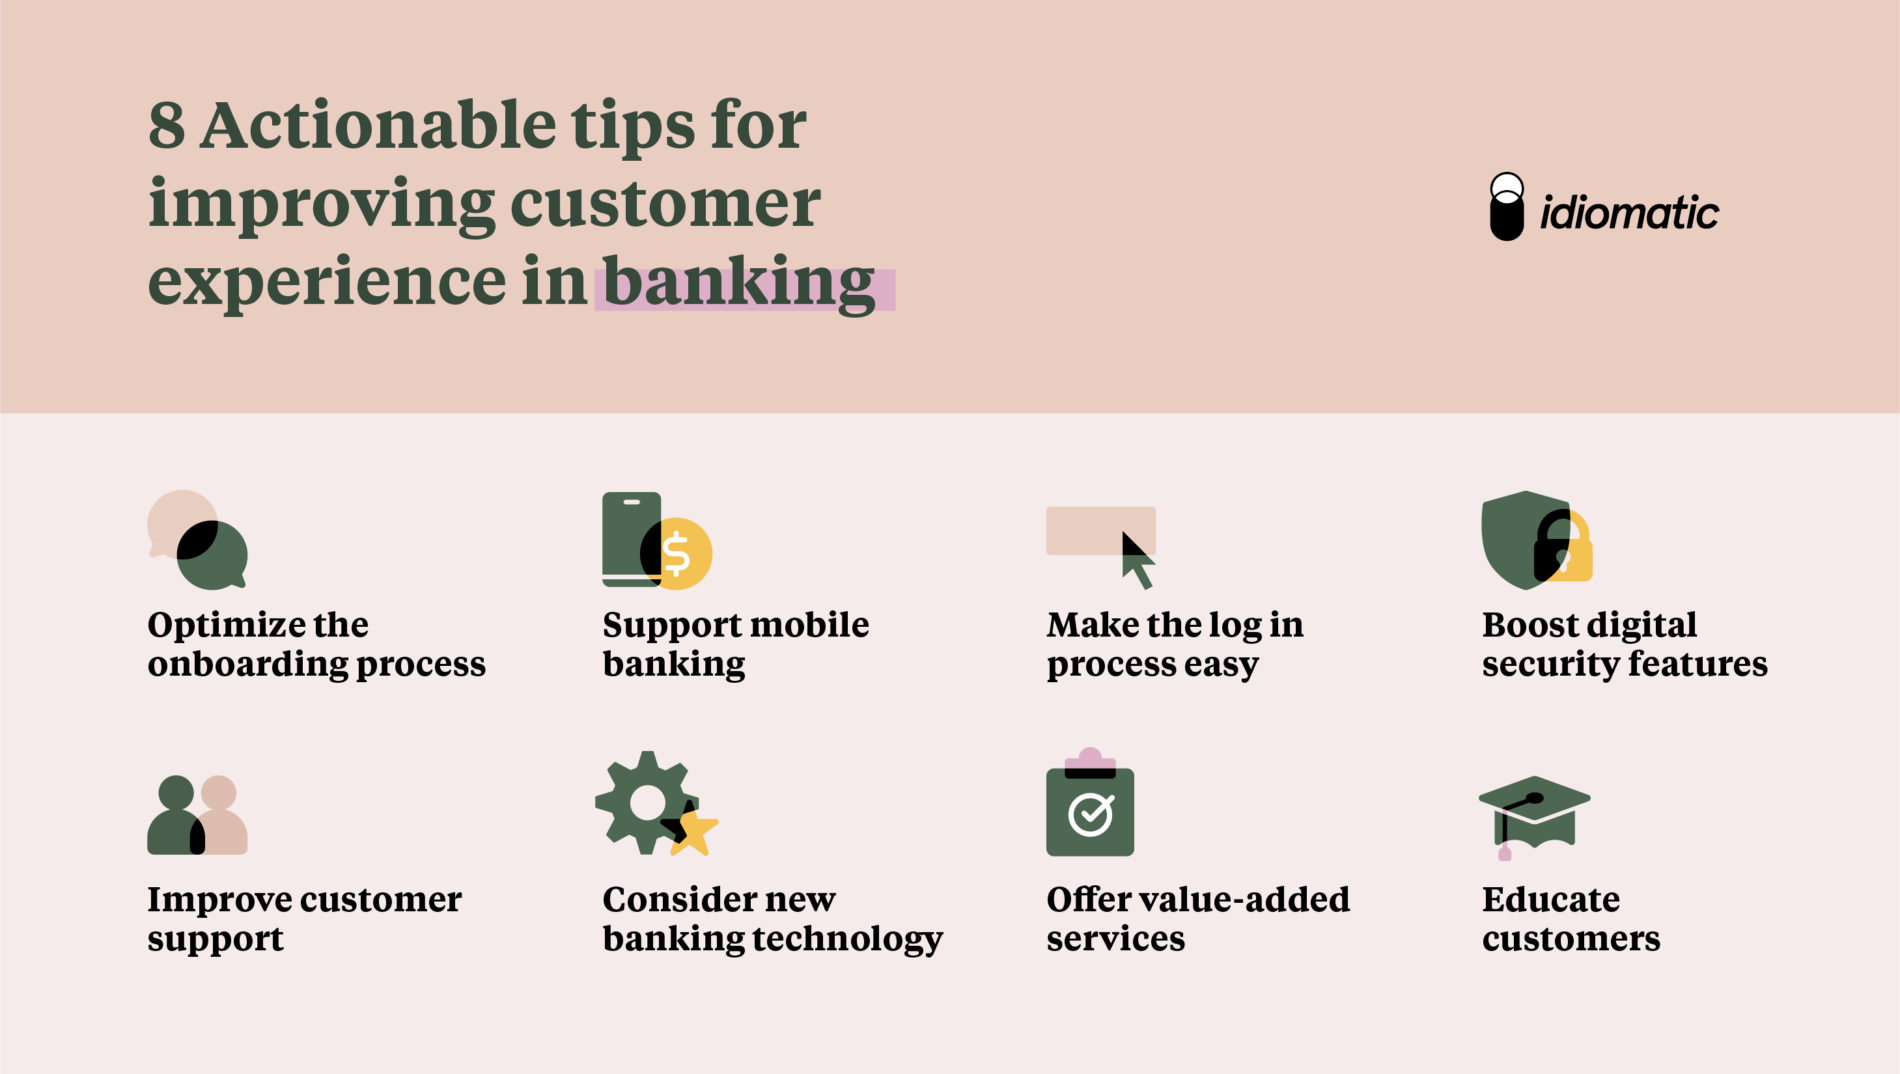 actionable tips for improving customer experience in banking